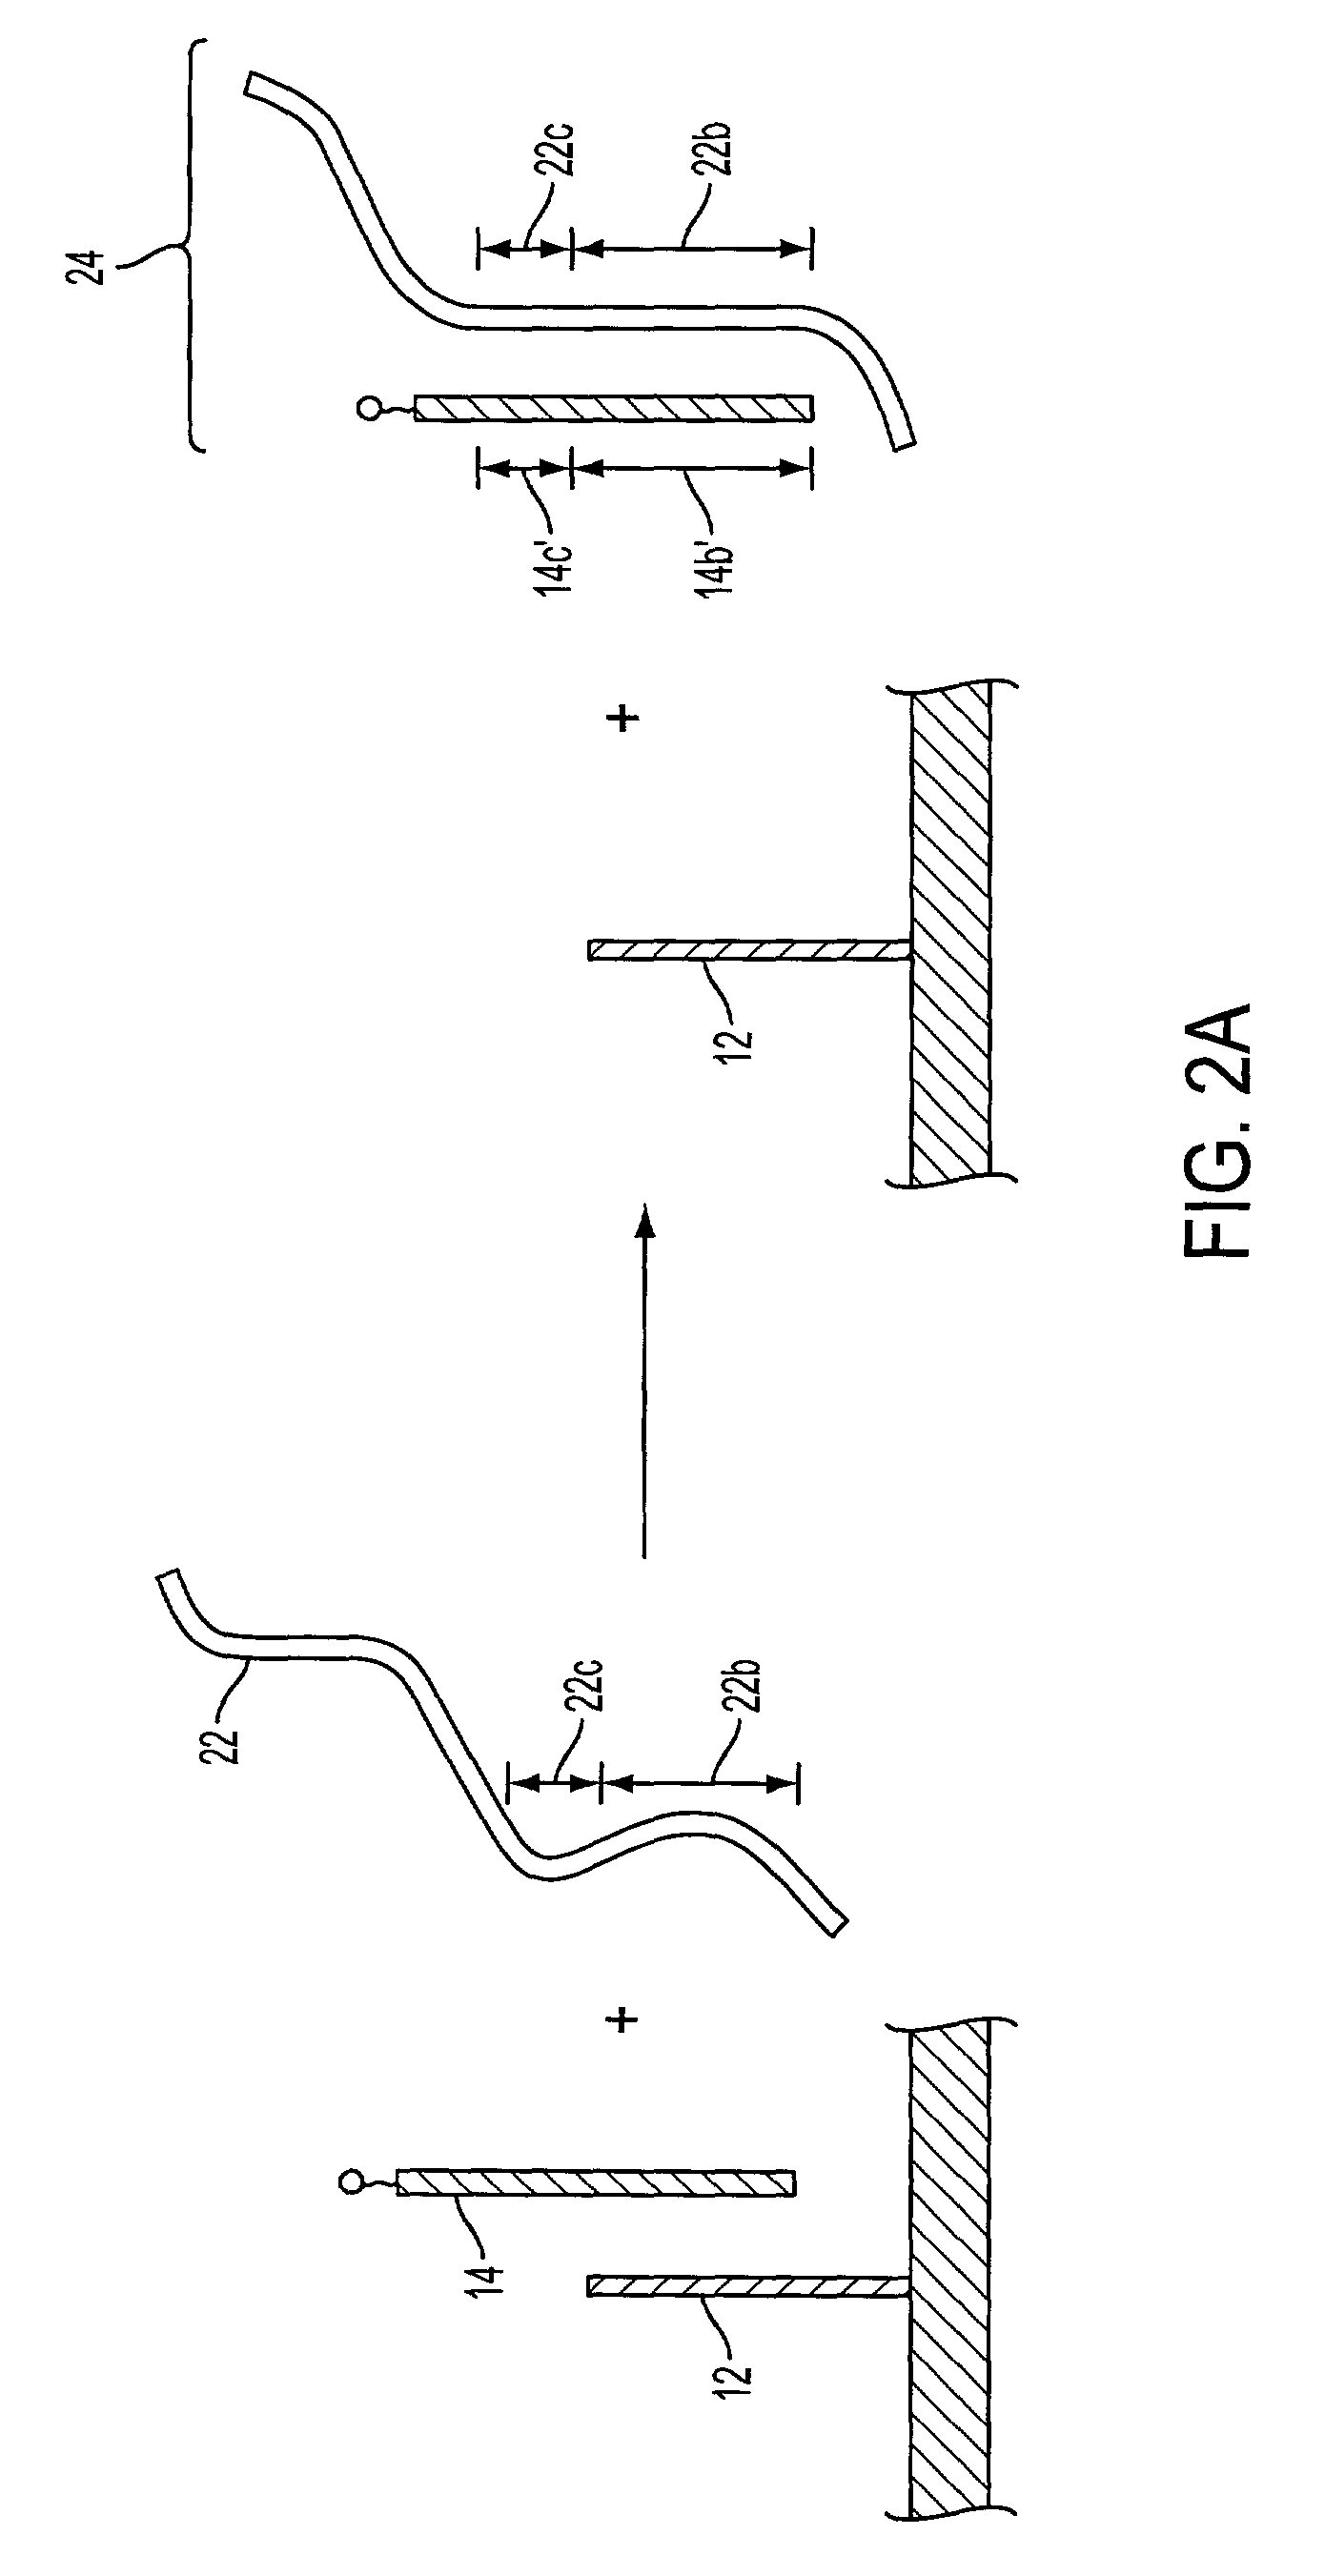 Nonenzymatic catalytic signal amplification for nucleic acid hybridization assays